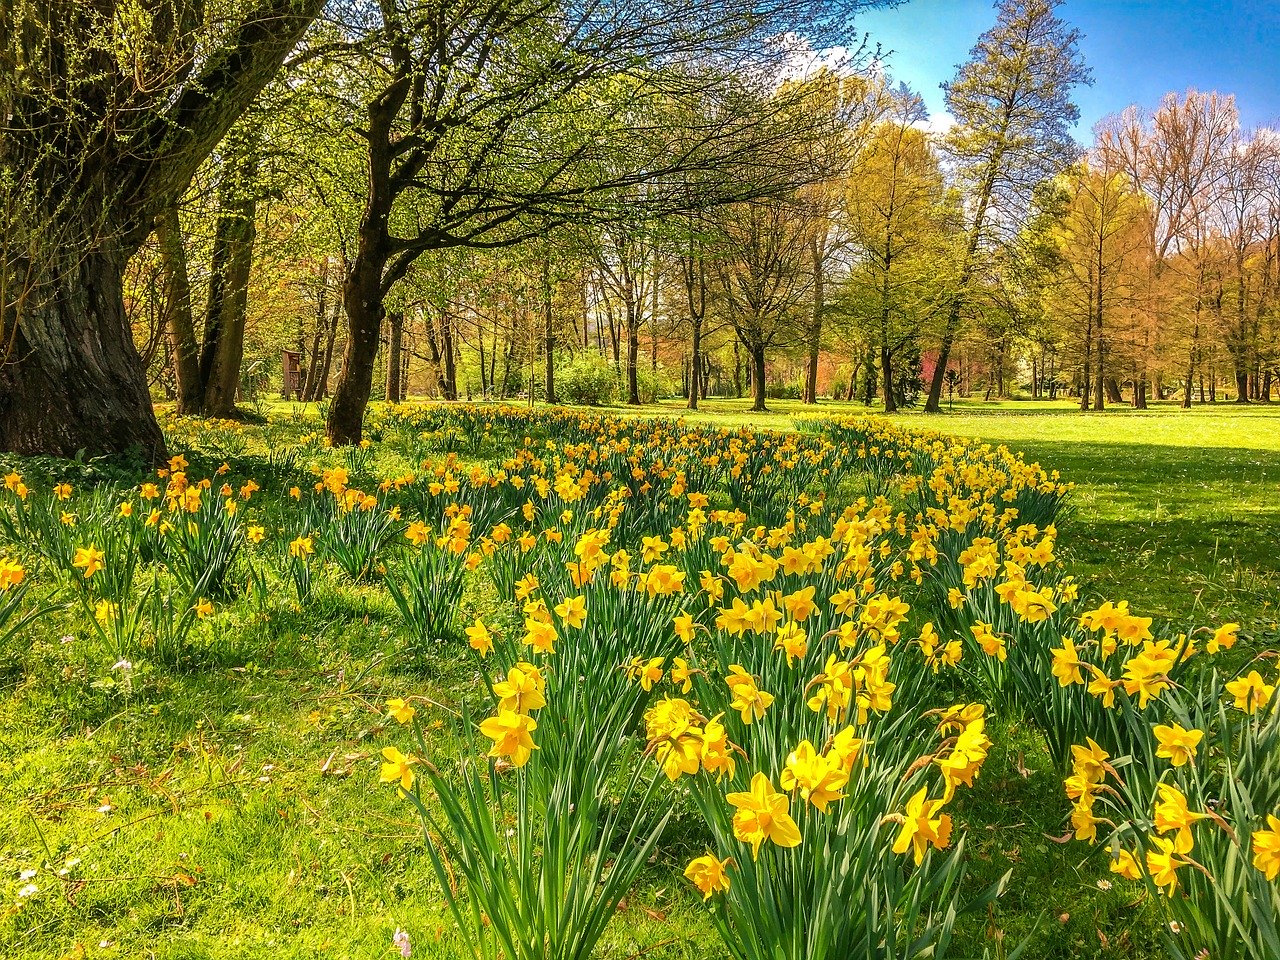 An image of a large grassy green park full of tall trees and yellow daffodils in spring.